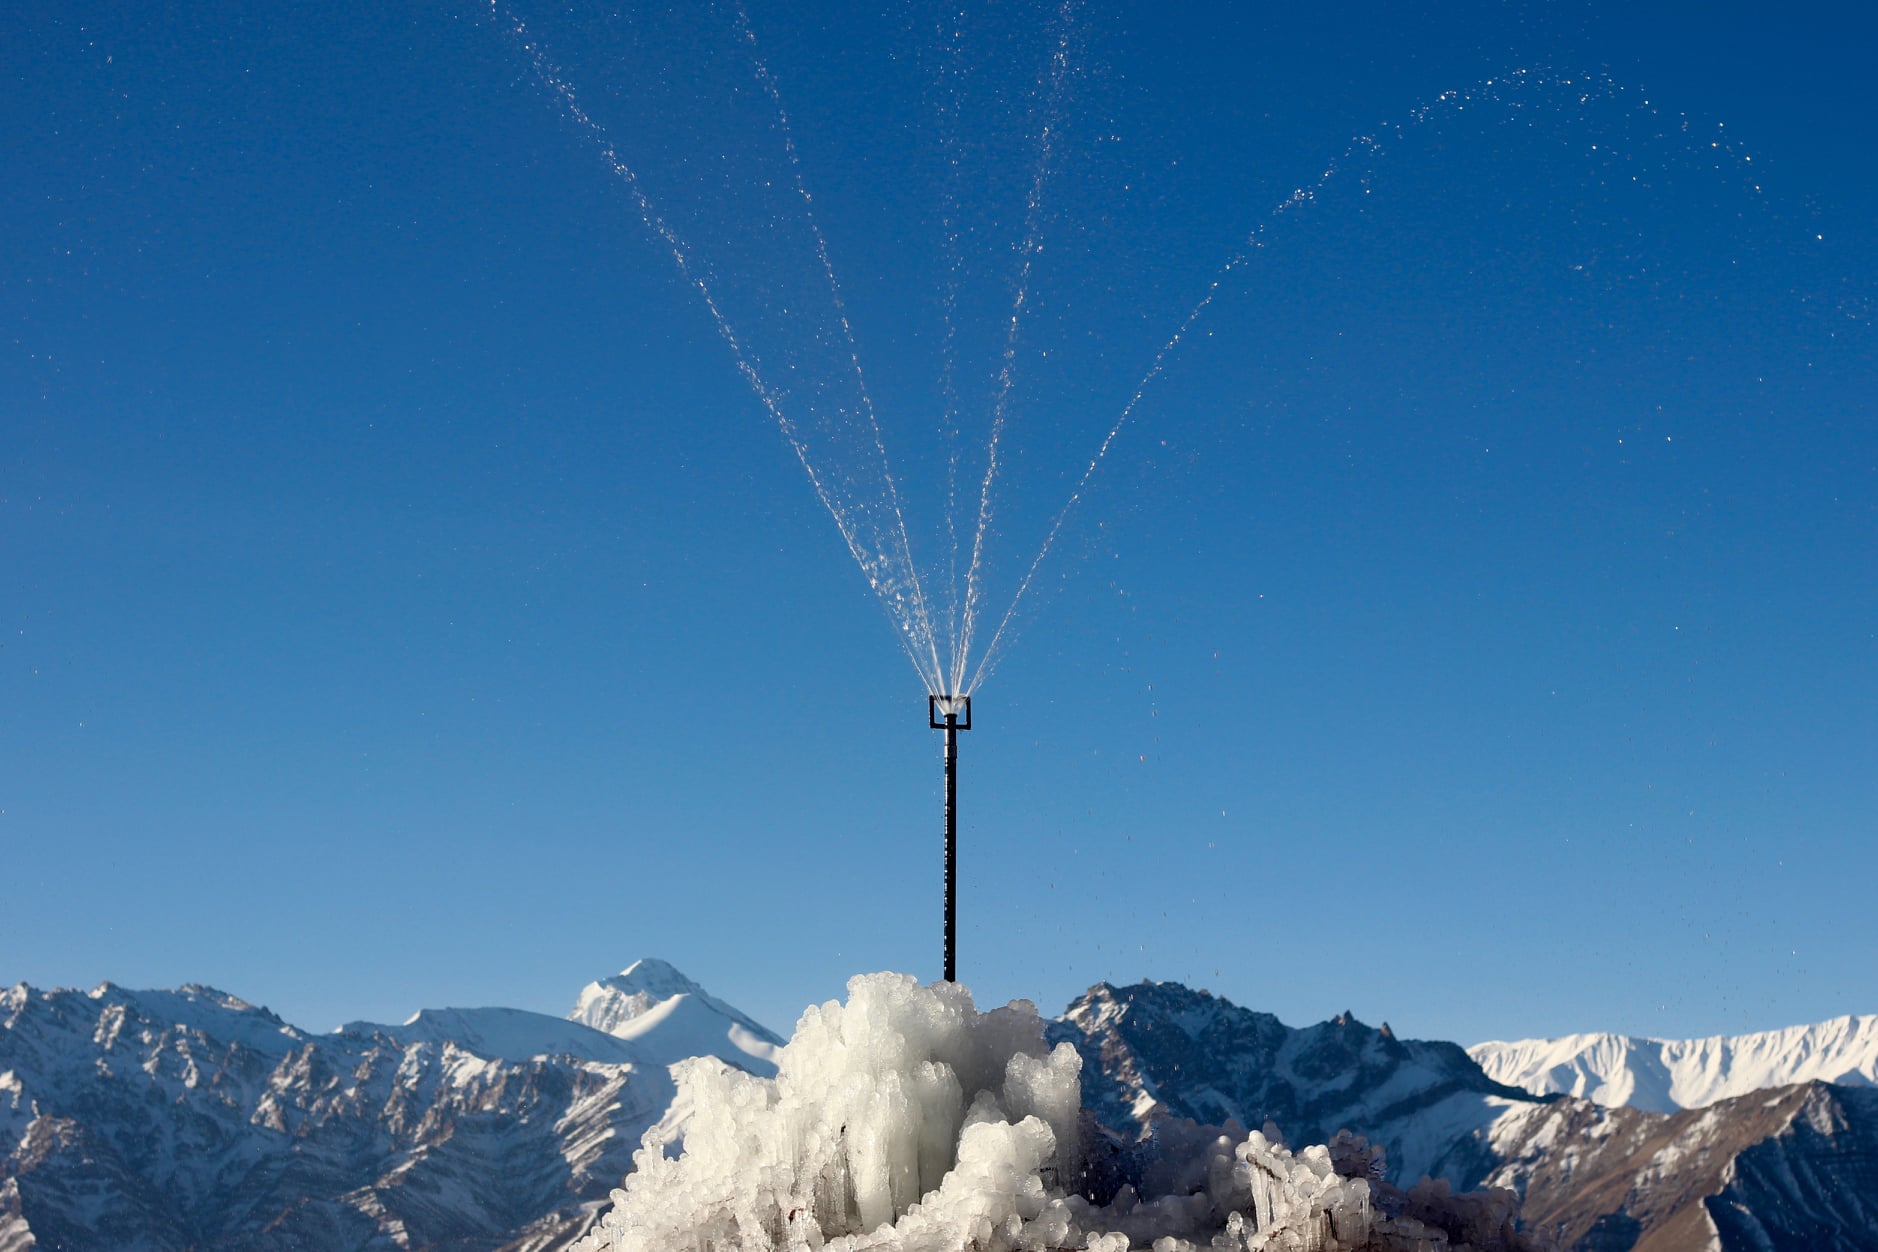  A sprinkler head on a tall pipe sprays five thin streams of water upward against a blue sky. Ice clusters around the base of the fountain. Snowy mountain peaks are in the background. 